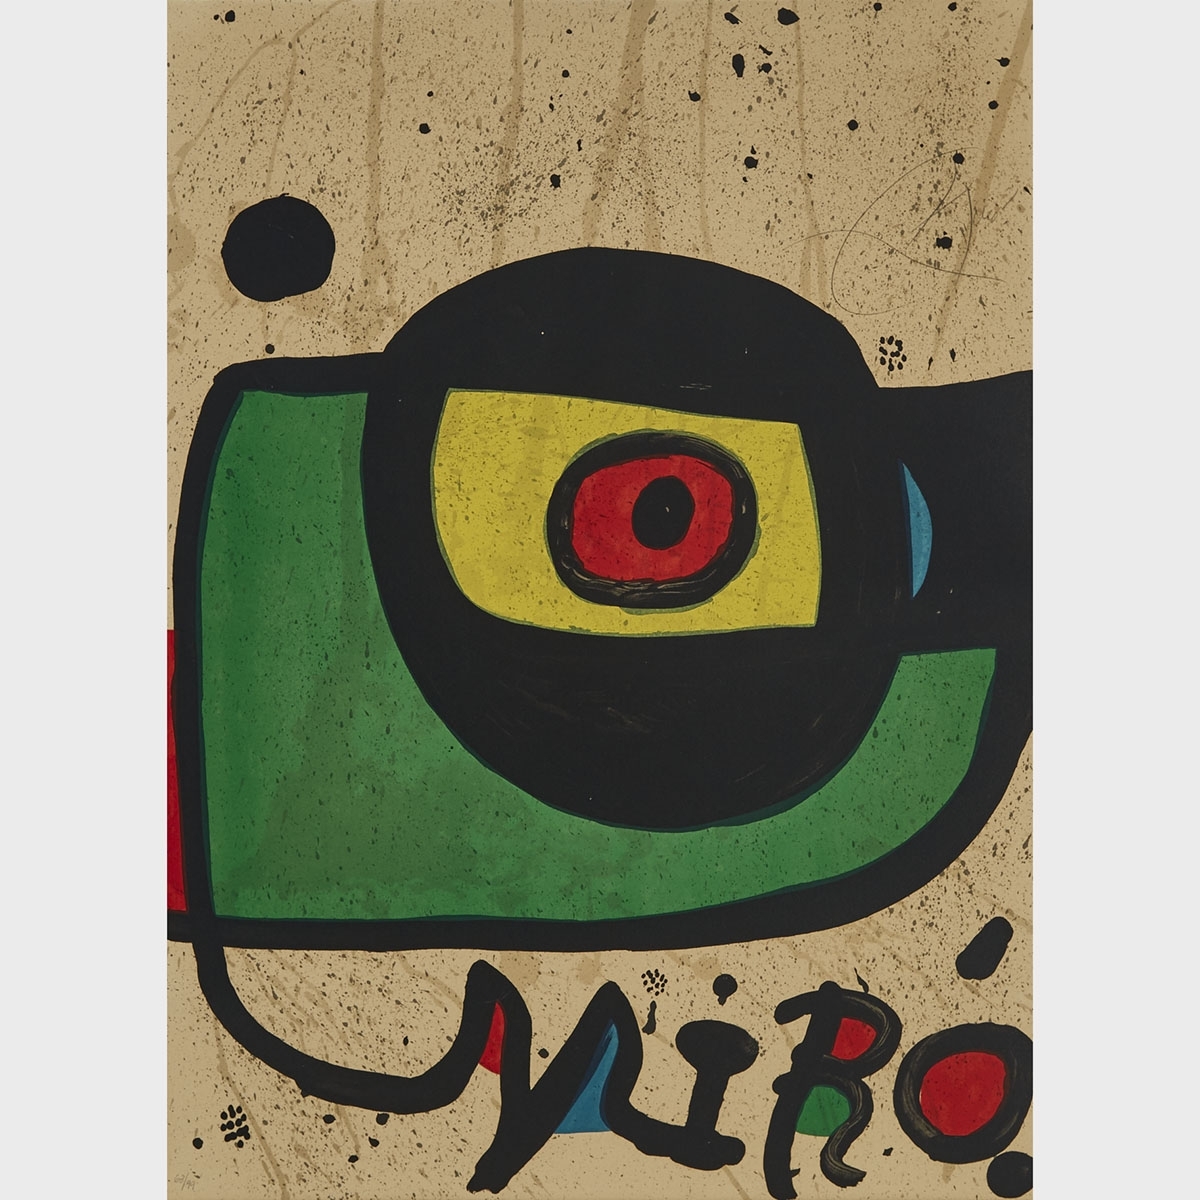 Artwork by Joan Miró, MIRO PINTURA (DESIGN FOR A POSTER (WITHOUT LETTERS), Made of Colour lithograph